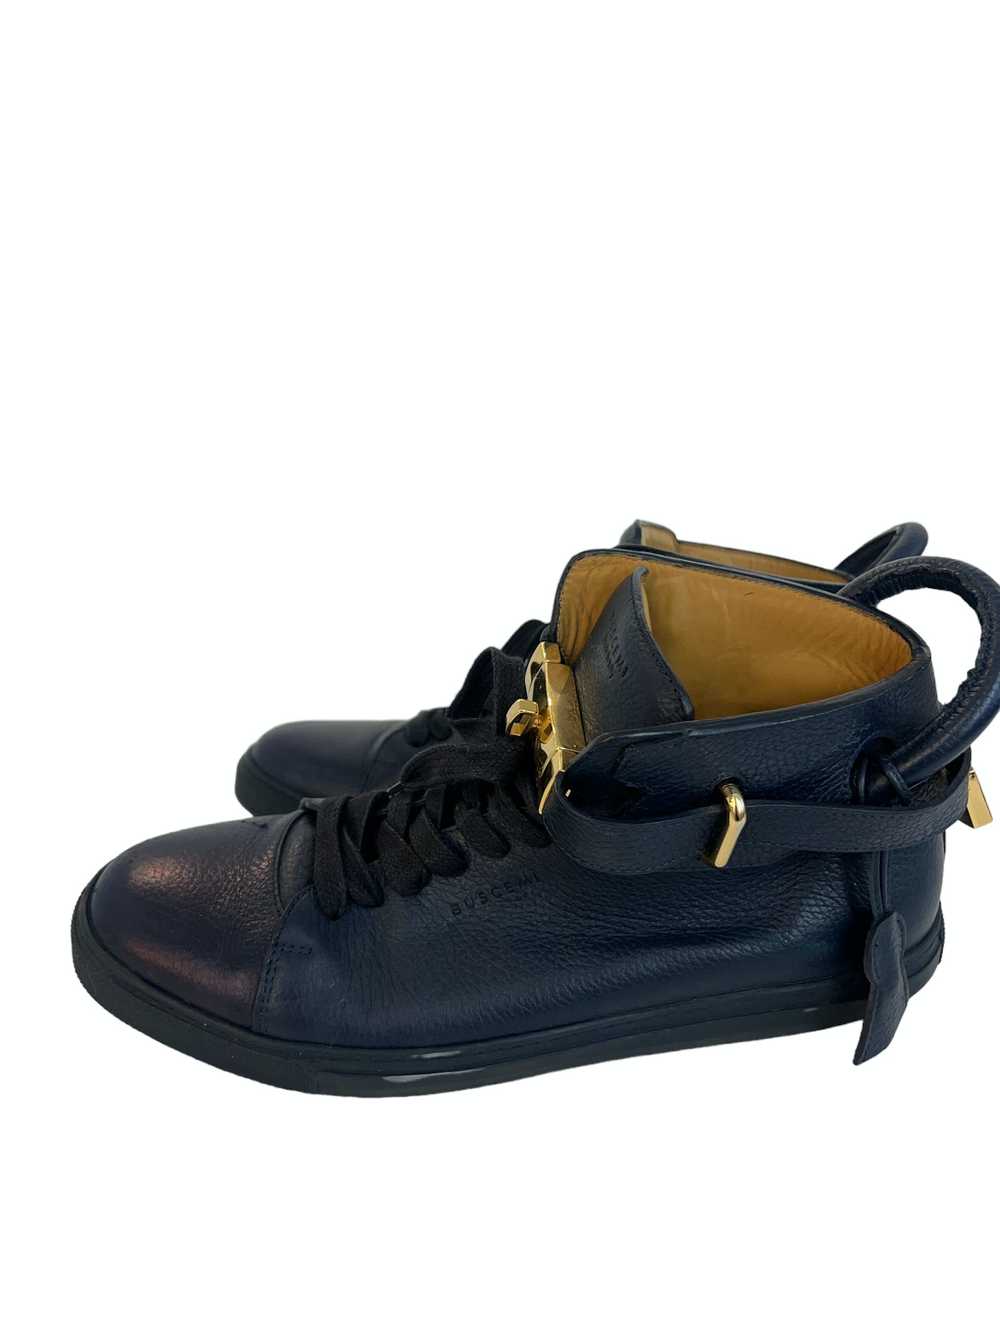 Buscemi Buscemi 100 mm high tops sneakers - image 5